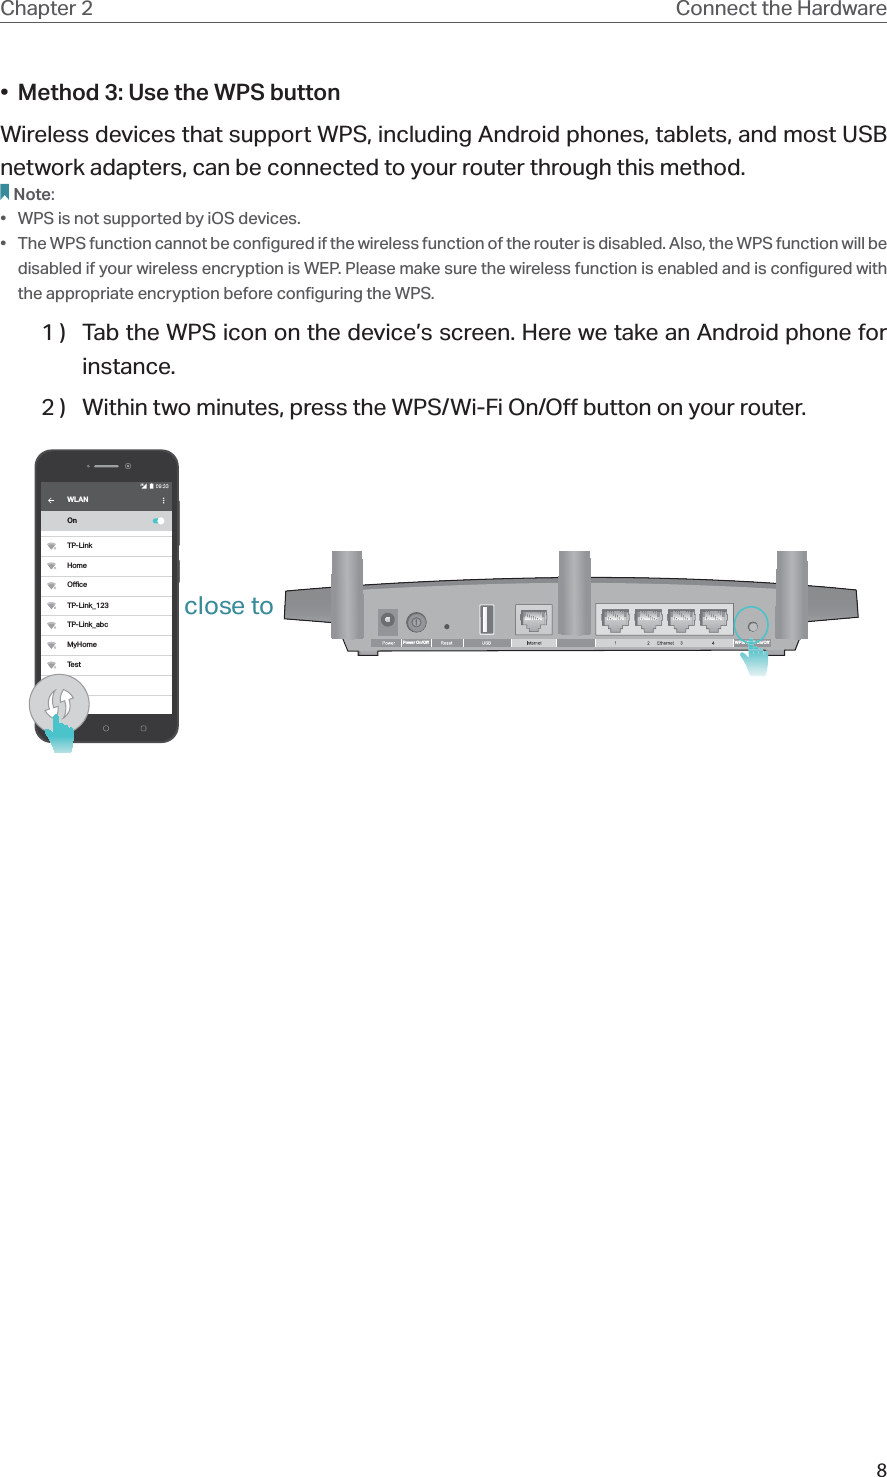 8Chapter 2 Connect the Hardware•  Method 3: Use the WPS buttonWireless devices that support WPS, including Android phones, tablets, and most USB network adapters, can be connected to your router through this method.Note:•  WPS is not supported by iOS devices.•  The WPS function cannot be configured if the wireless function of the router is disabled. Also, the WPS function will be disabled if your wireless encryption is WEP. Please make sure the wireless function is enabled and is configured with the appropriate encryption before configuring the WPS.1 )  Tab the WPS icon on the device’s screen. Here we take an Android phone for instance.2 )  Within two minutes, press the WPS/Wi-Fi On/Off button on your router. WPS/Wi-Fi On/OPower On/OWi FWi FWLANOnTP-LinkHomeOceTP-Link_123TP-Link_abcMyHomeTestclose to